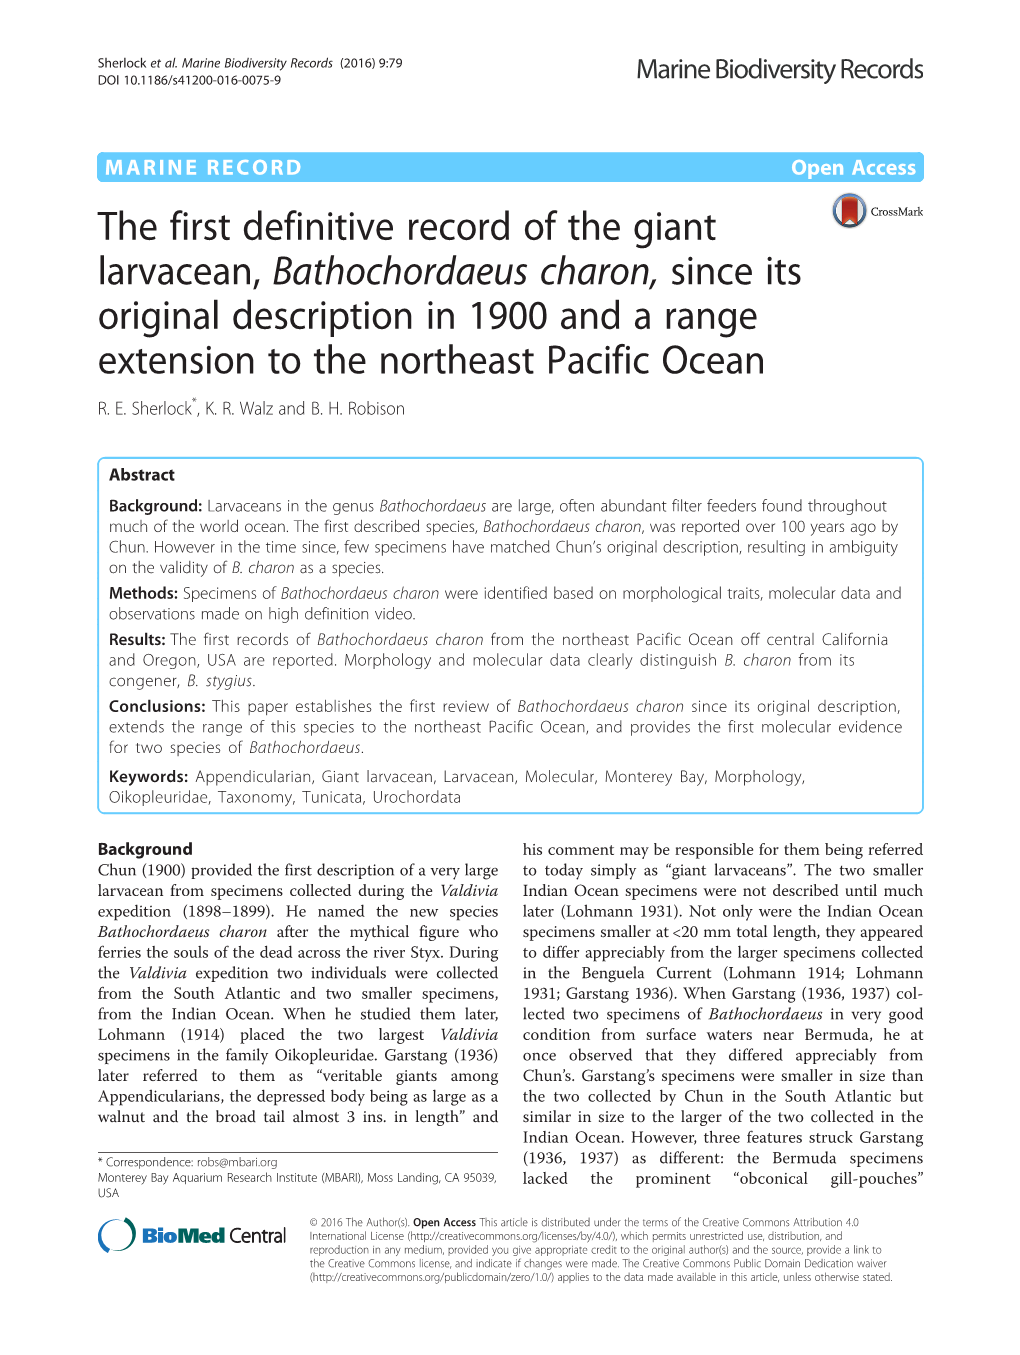 The First Definitive Record of the Giant Larvacean, Bathochordaeus Charon